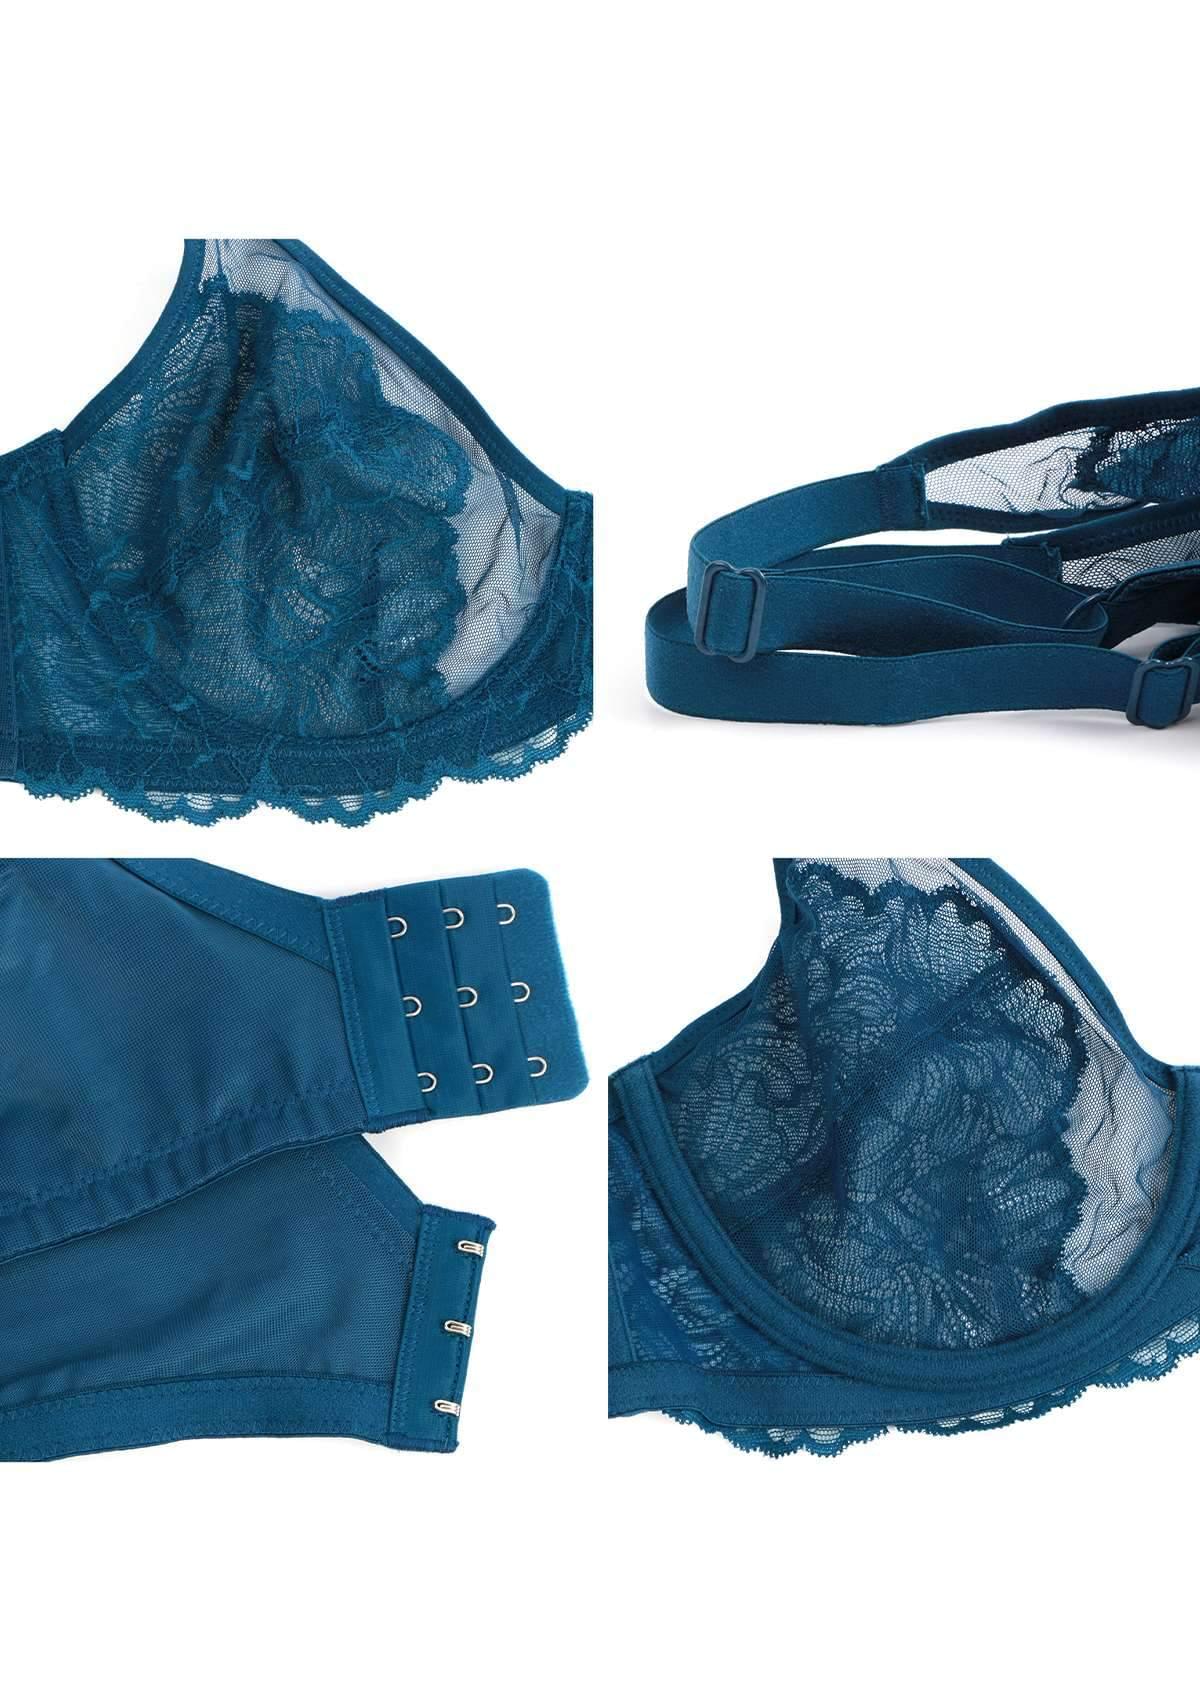 HSIA Blossom Lace Bra And Underwear Sets: Comfortable Plus Size Bra - Biscay Blue / 38 / C